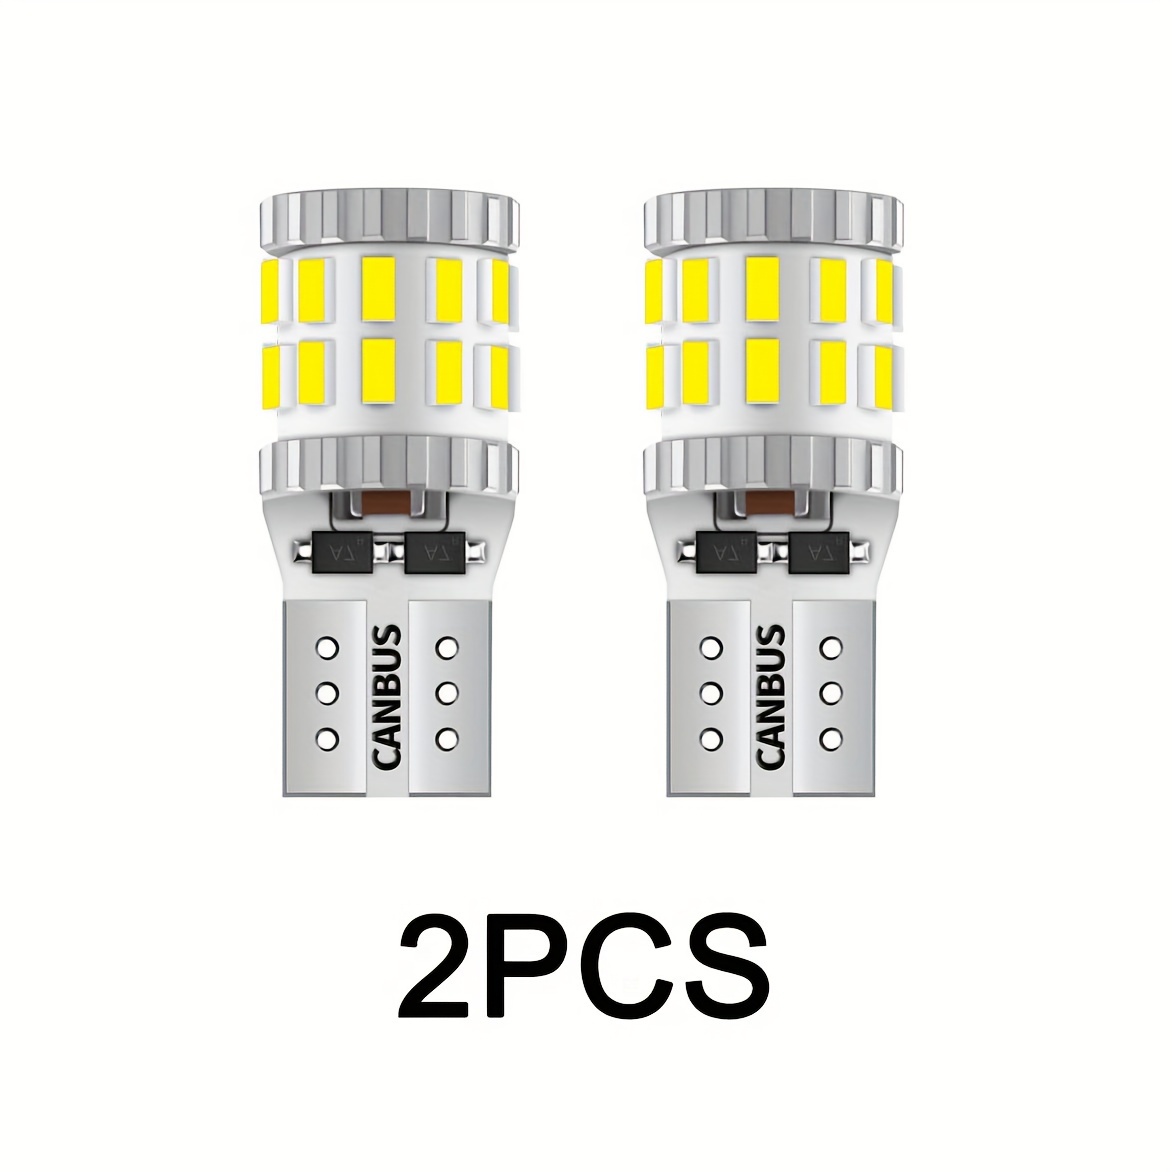 

194 Led Bulbs White, Canbus Error Free 168 2825 T10 W5w Led Light Bulbs For License Plate Lights Interior Lights Dome Map Light, 30-smd, 2pcs